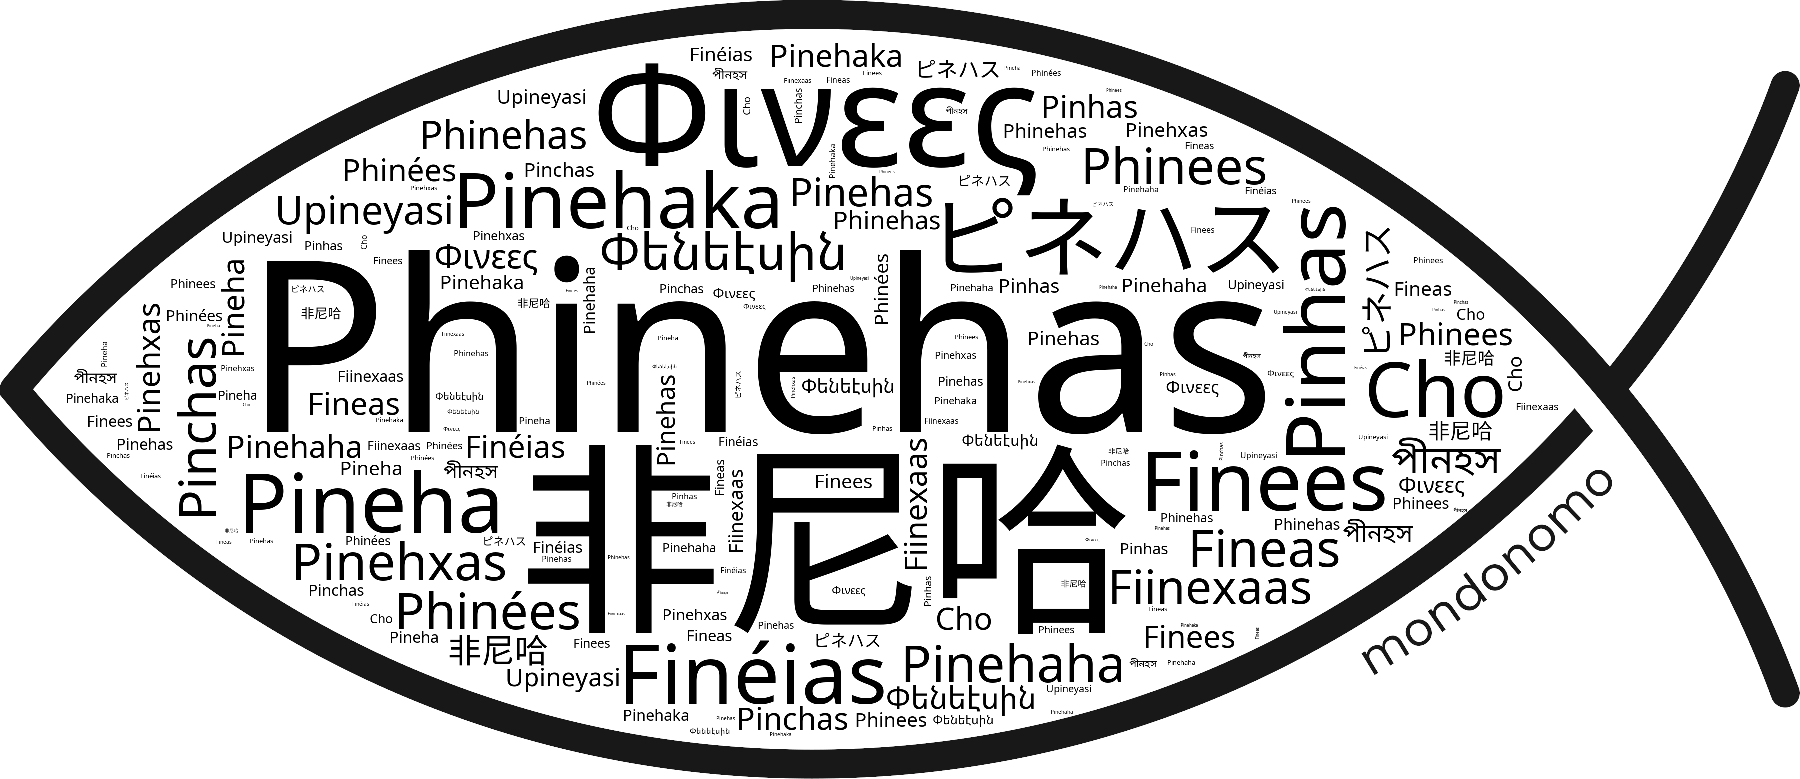 Name Phinehas in the world's Bibles